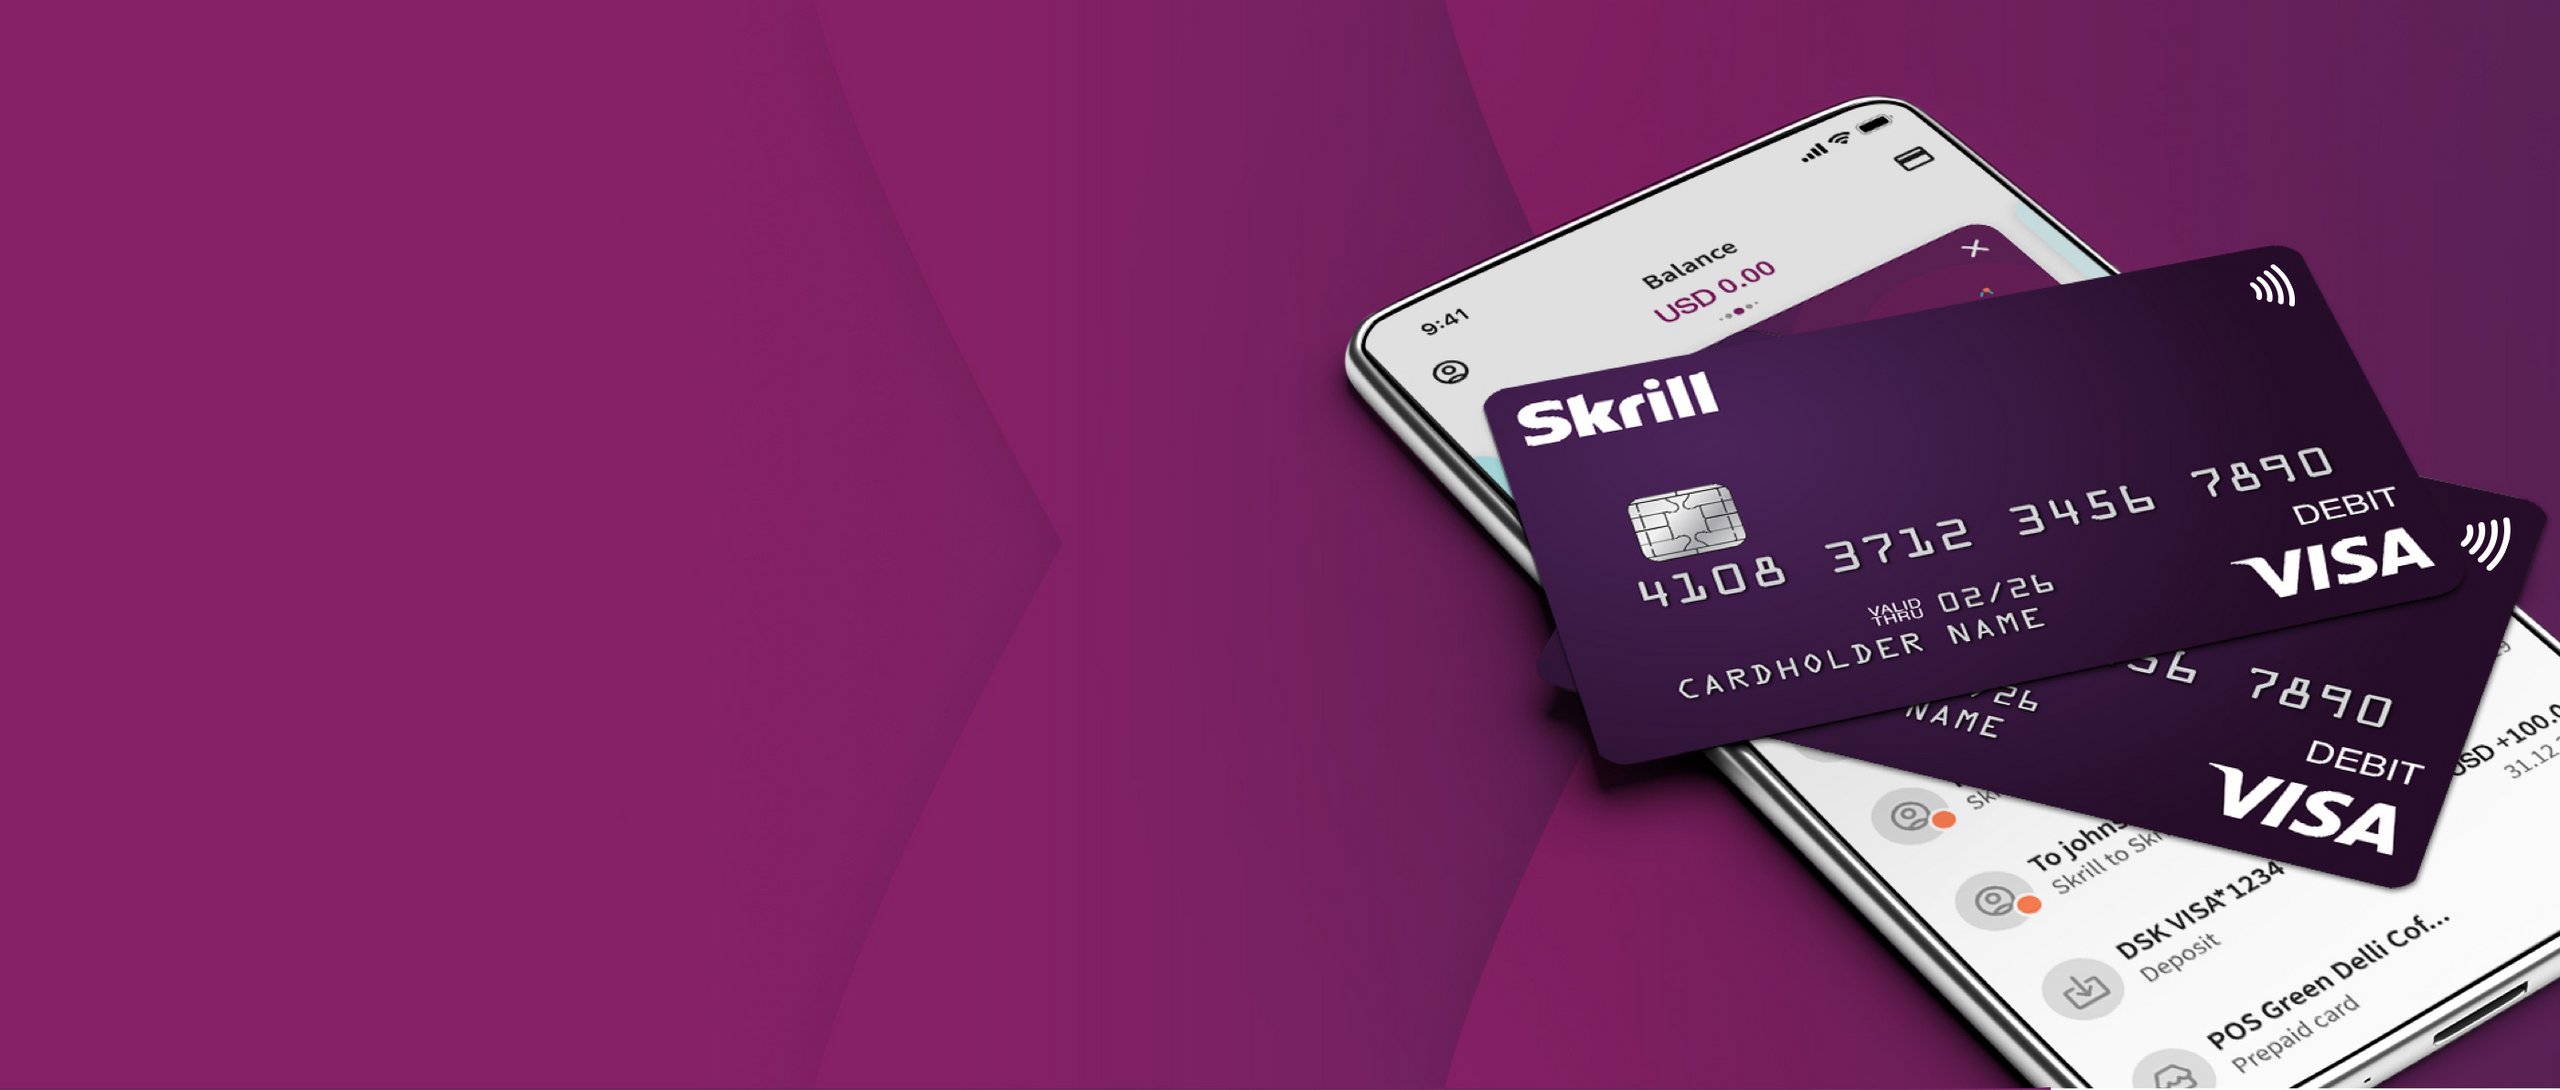 Skrill VISA cards over a mobile phone with active Skrill app